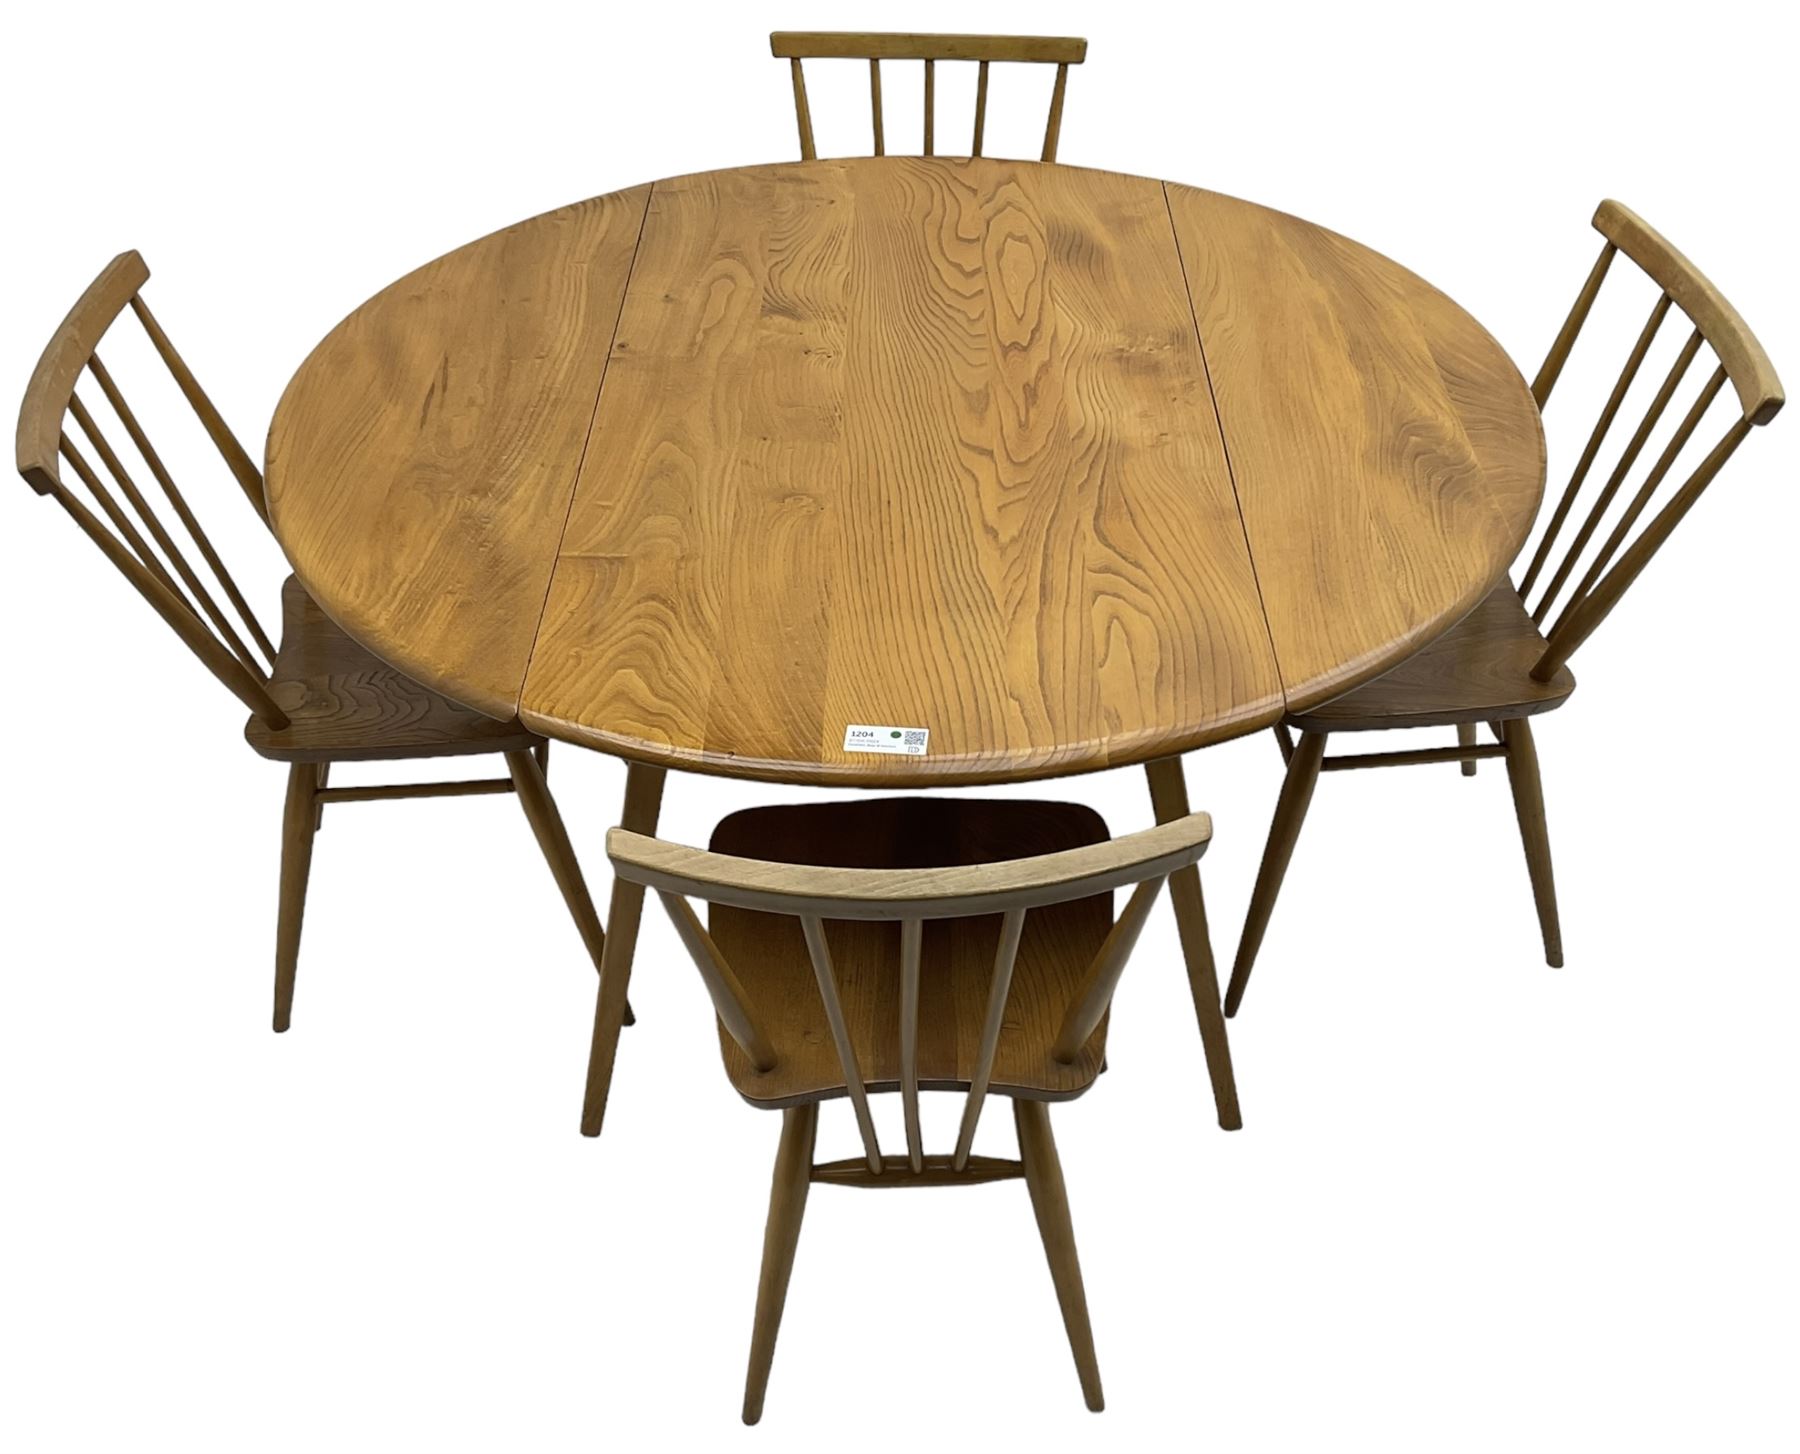 Ercol - elm and beech dining table - Image 6 of 6